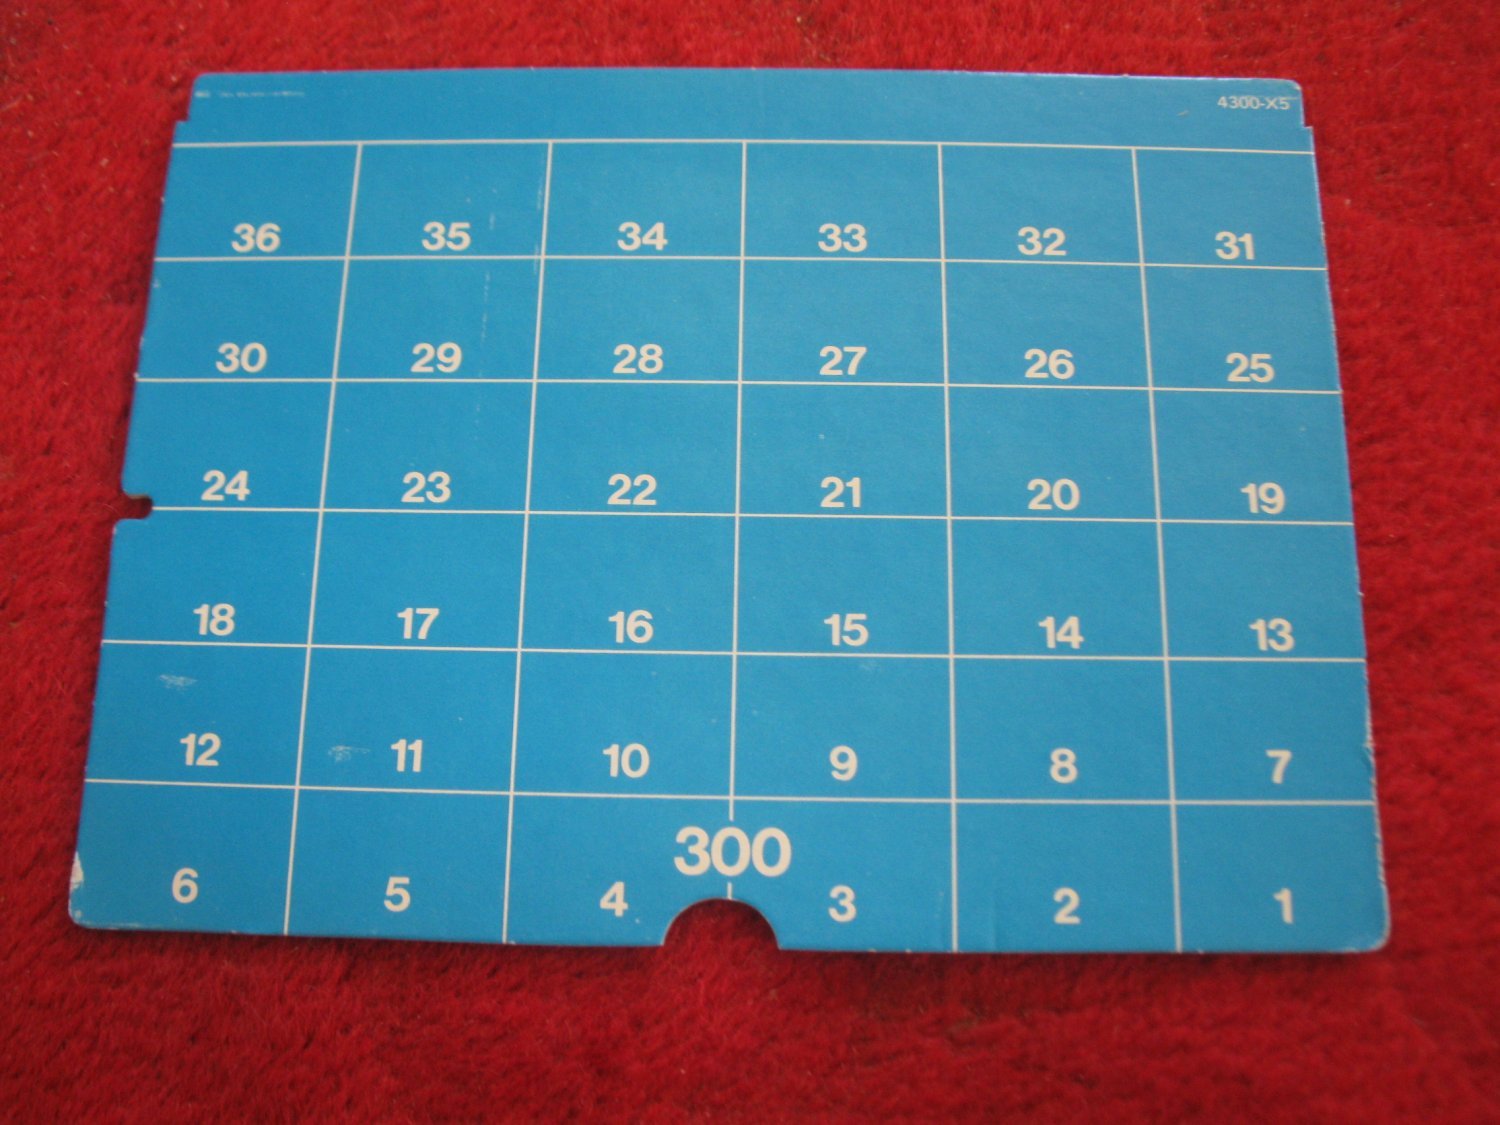 Primary image for 1973 Sub Search Board Game Replacement part: Cardboard Water Level 300